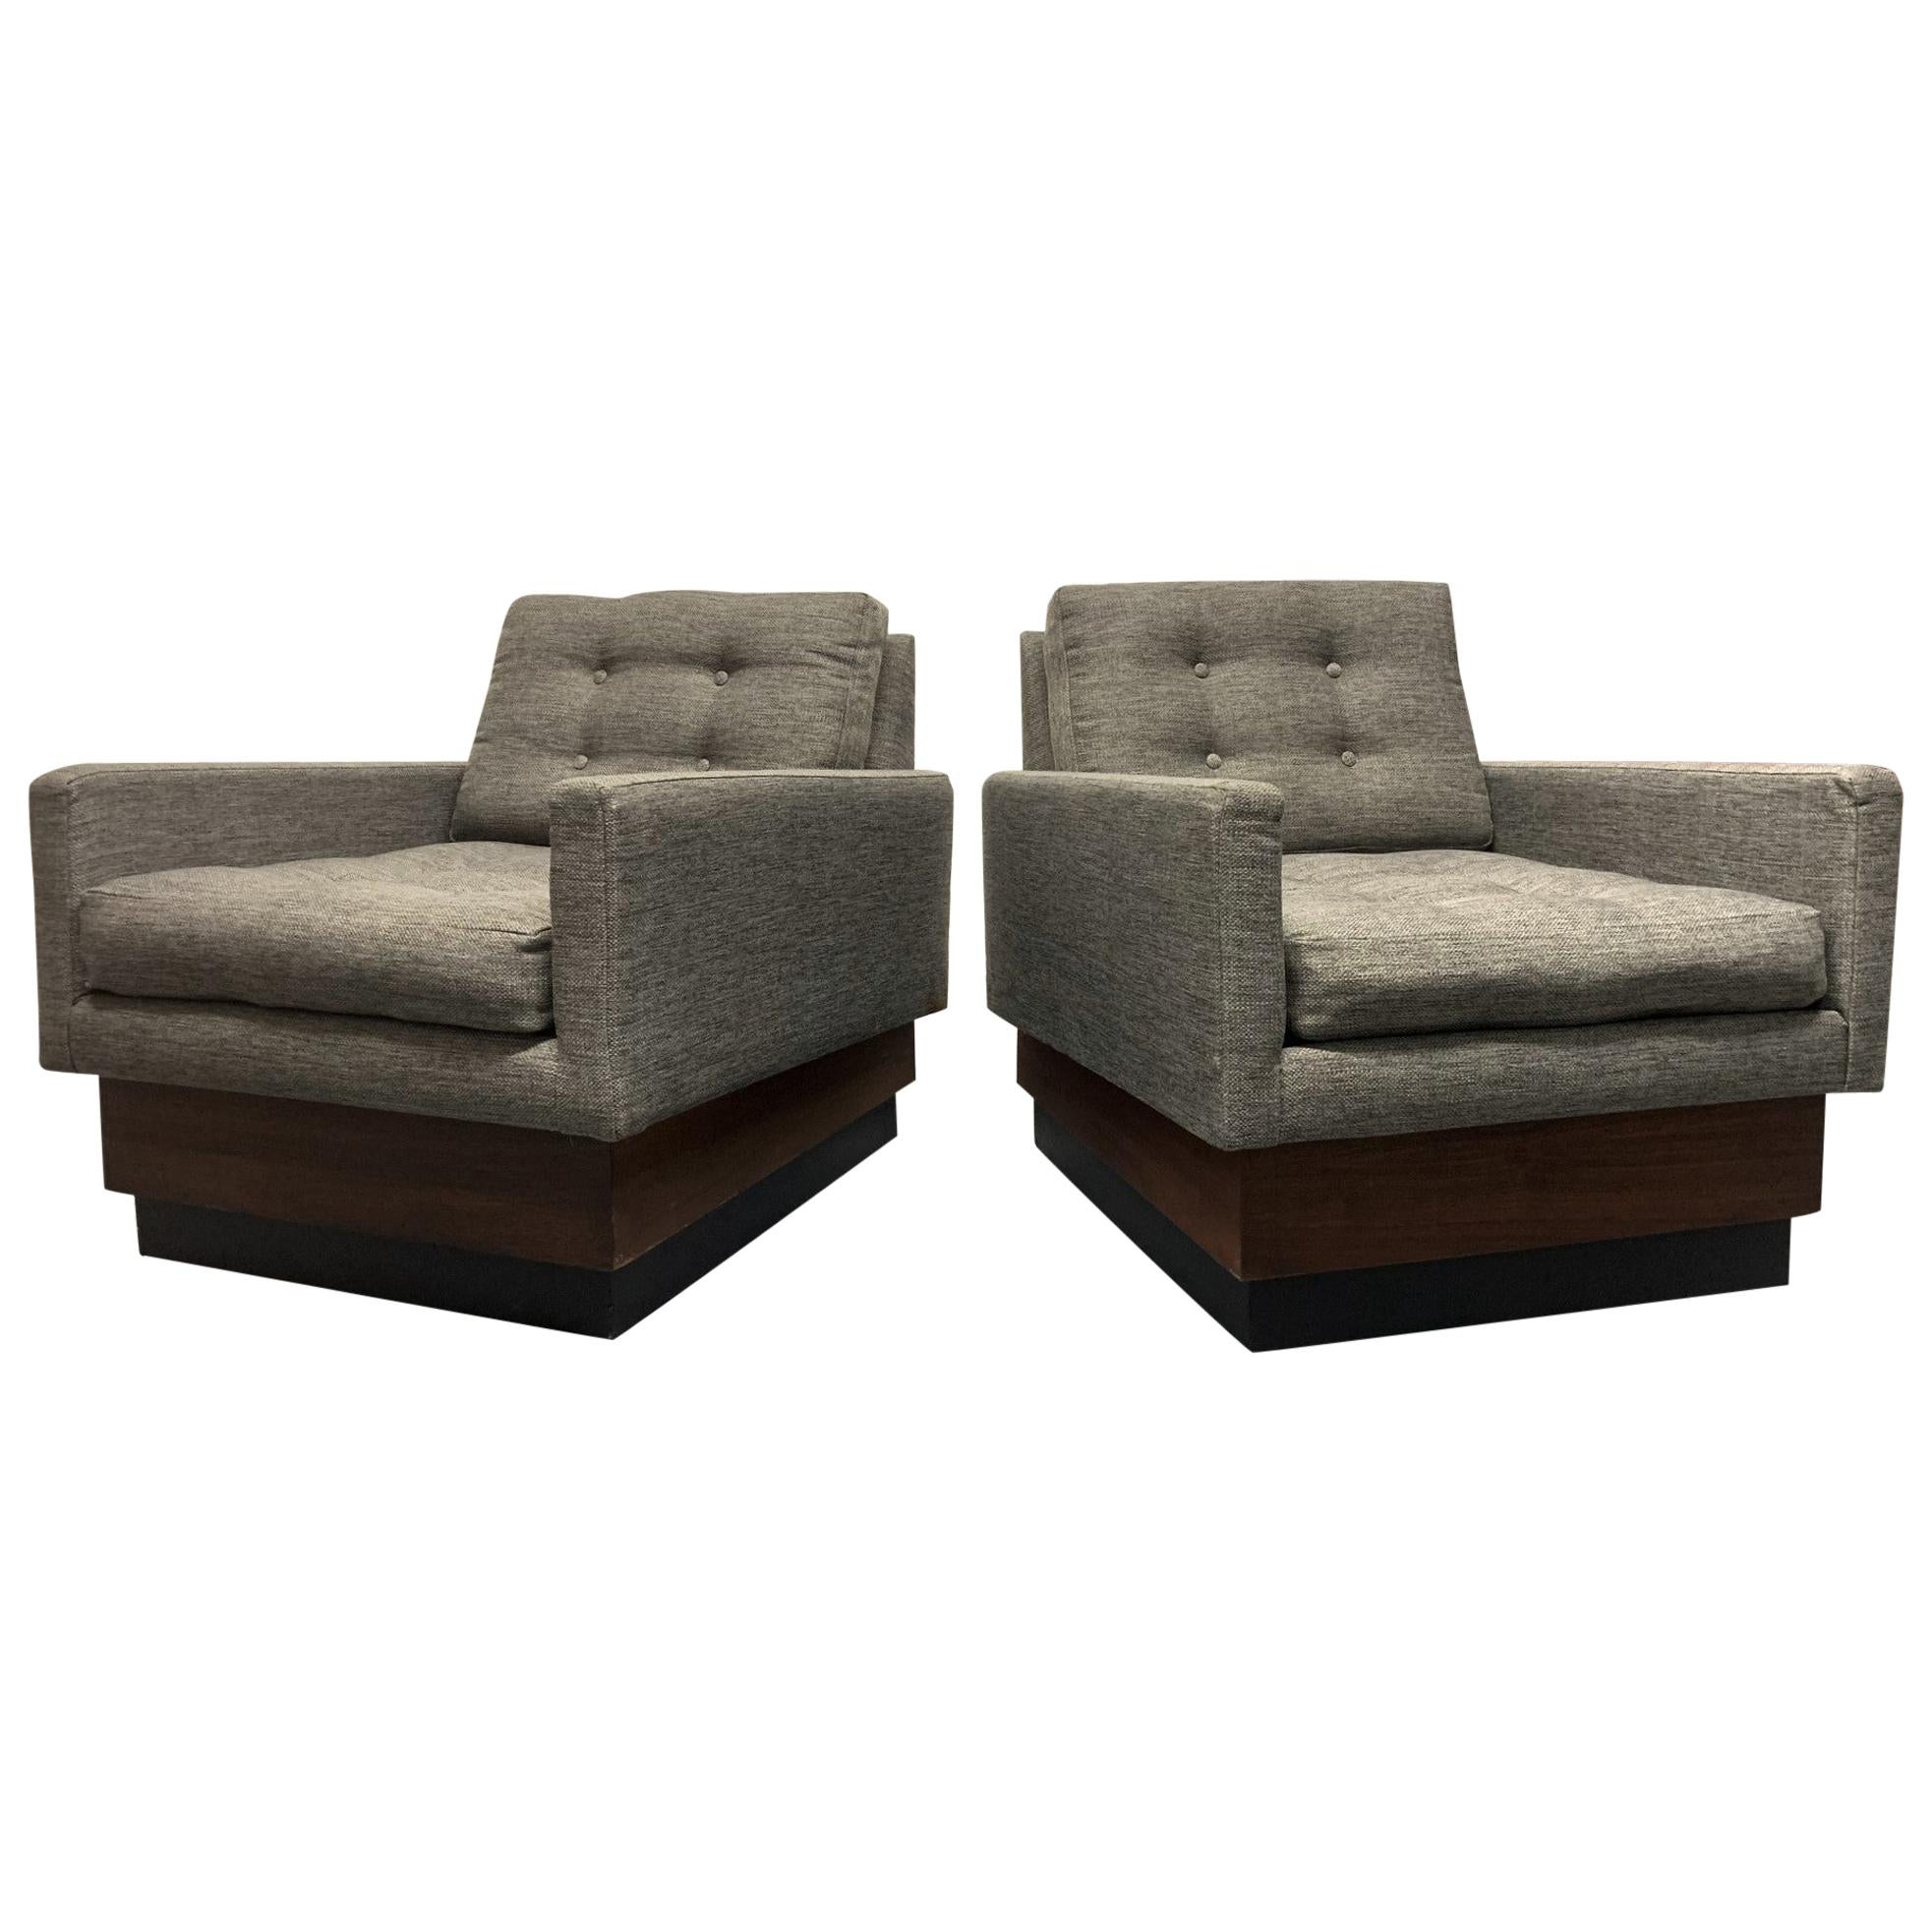 Pair of Lounge Chairs on Plinth Base